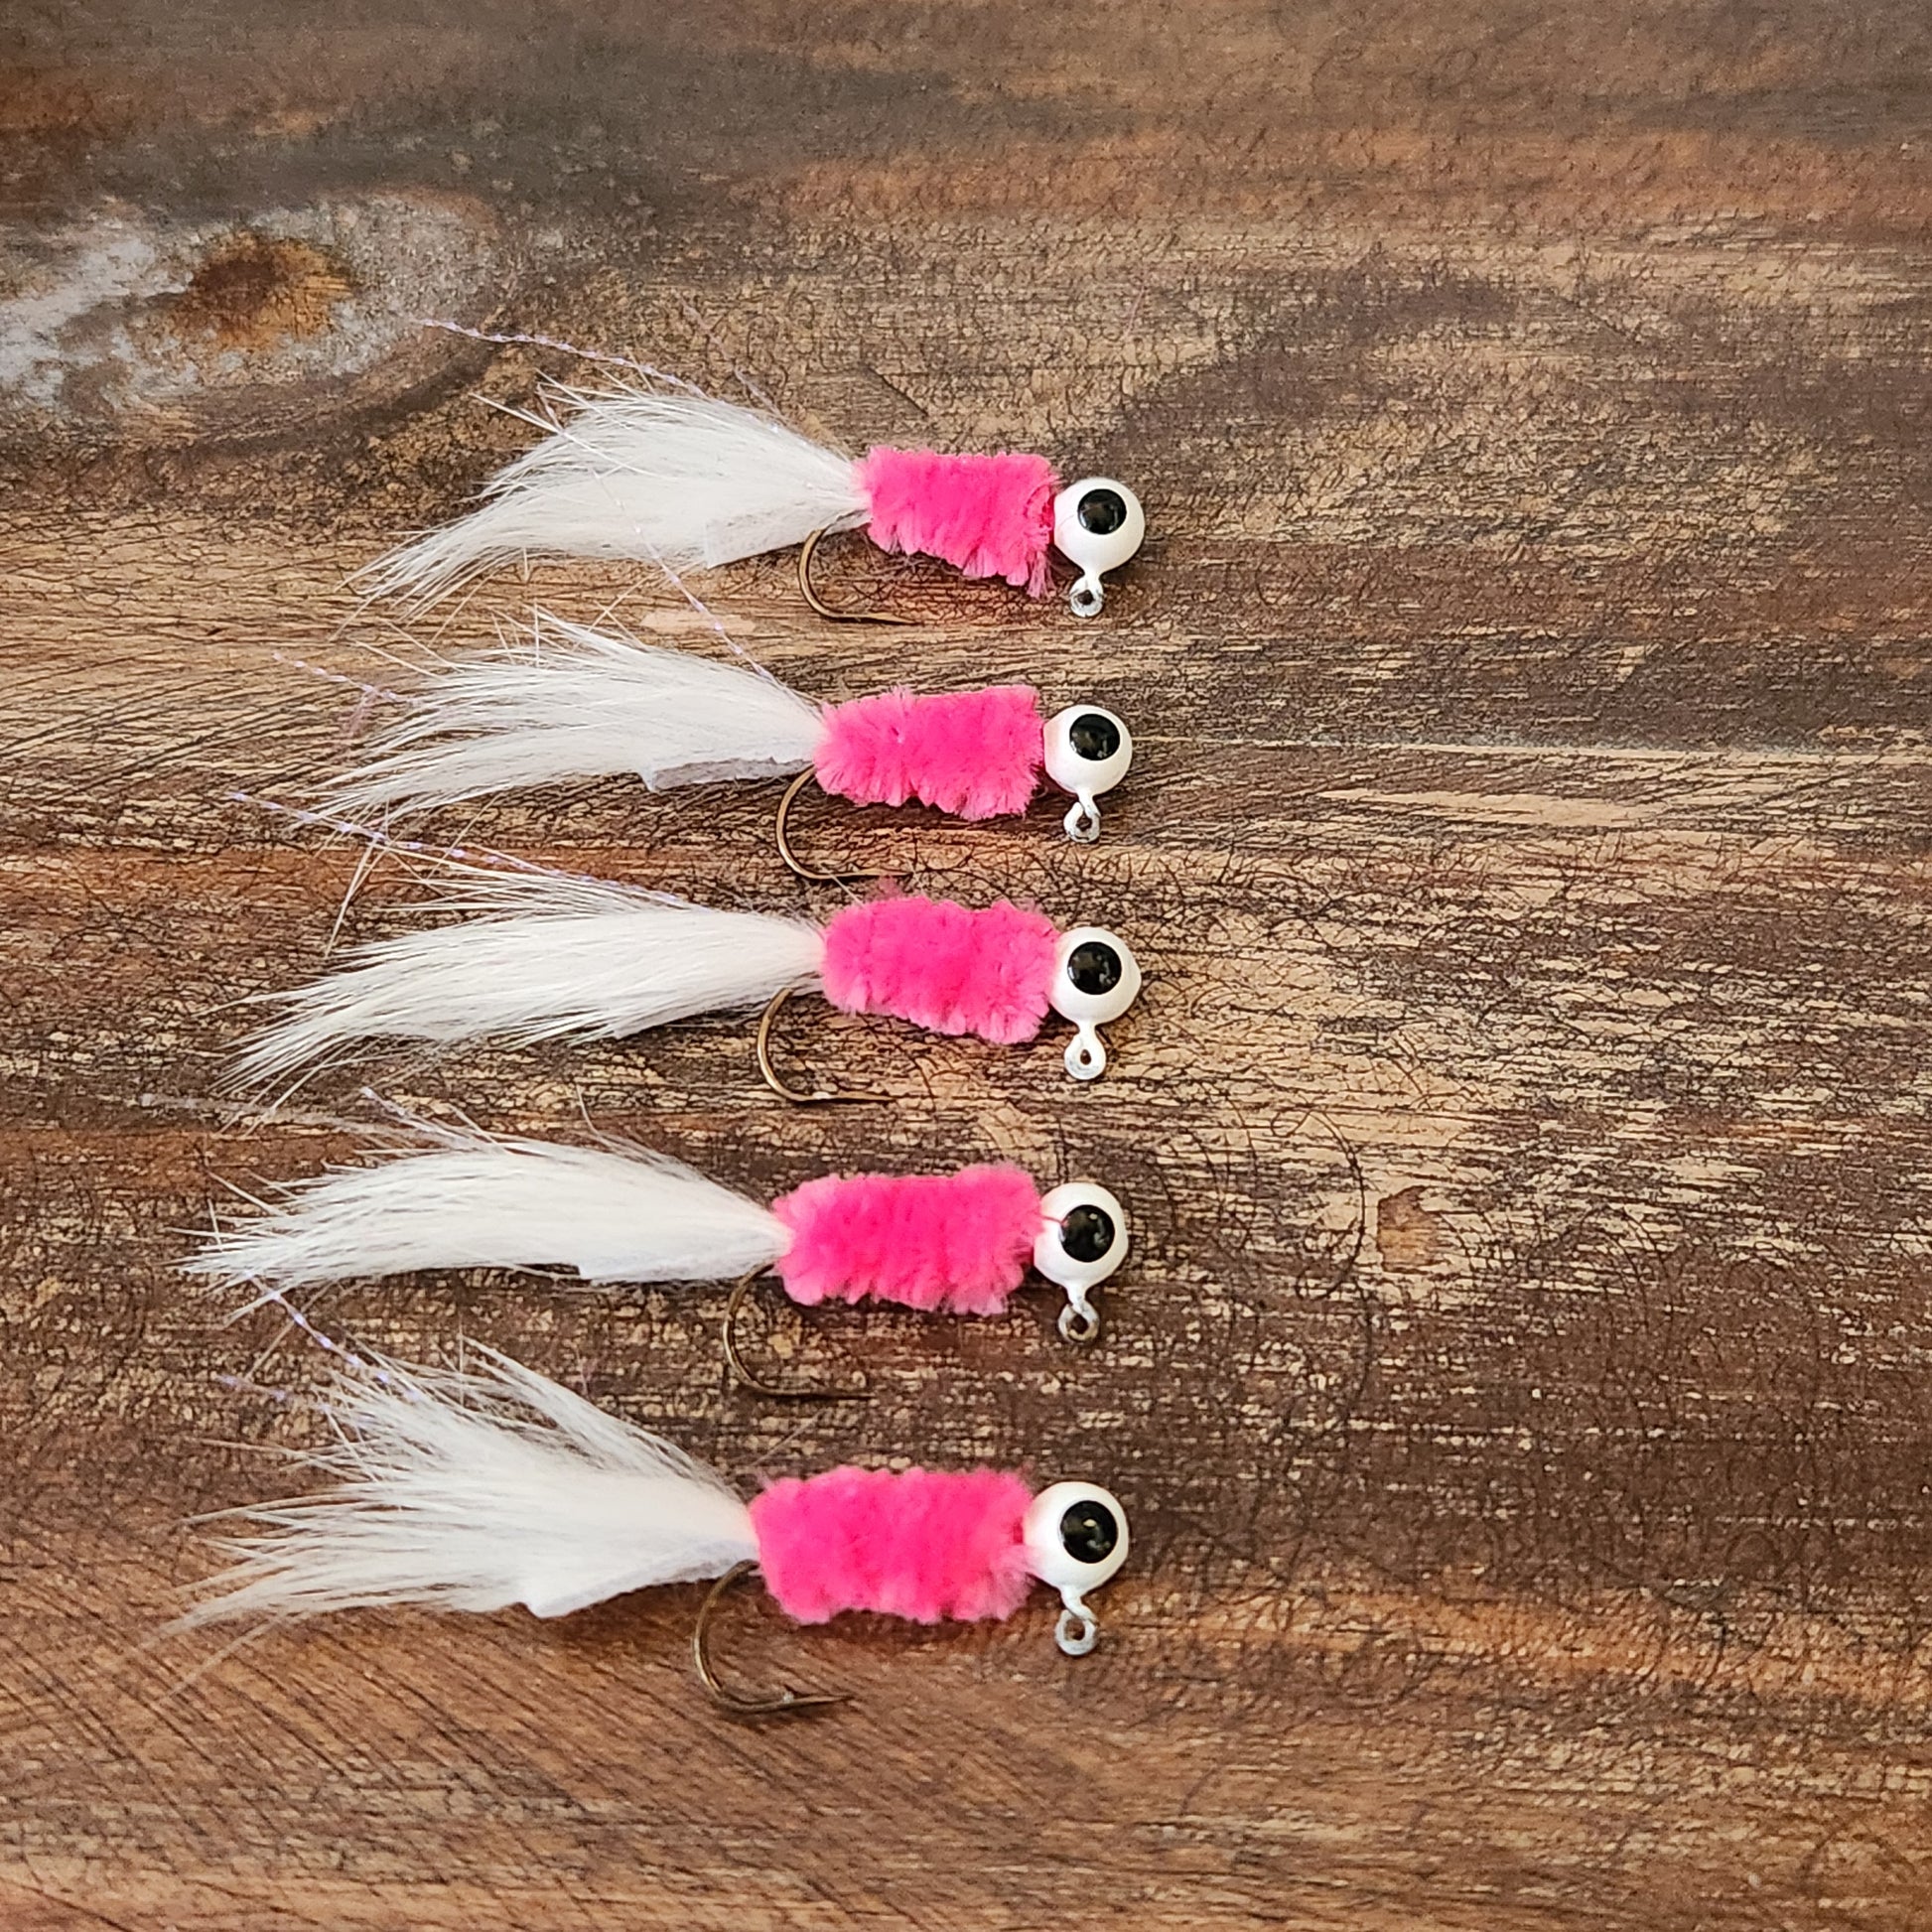 Crappie Jigs, Pink and White, 1/8 ounce, 5 pack for serious fishing. –  Out-A-Sight Gear